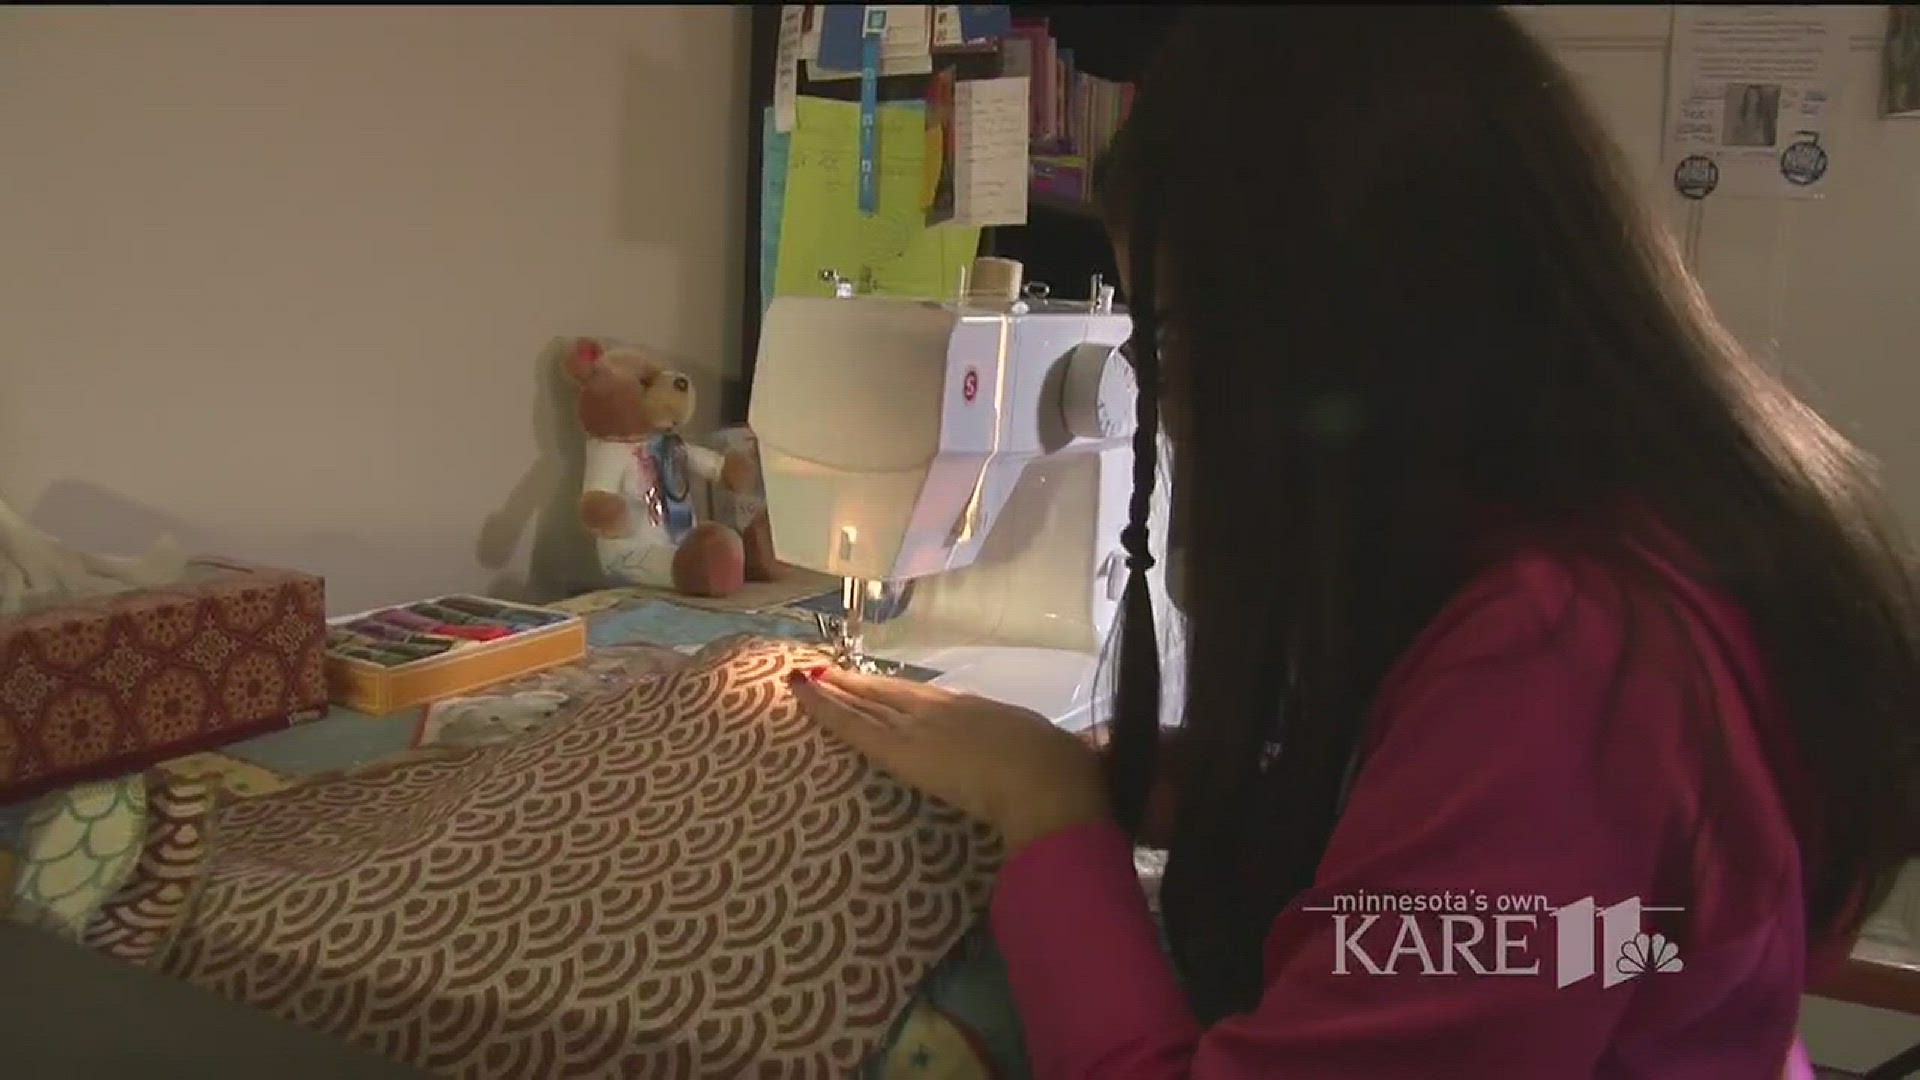 A Prior Lake 5the grader uses her Christmas wish to help others